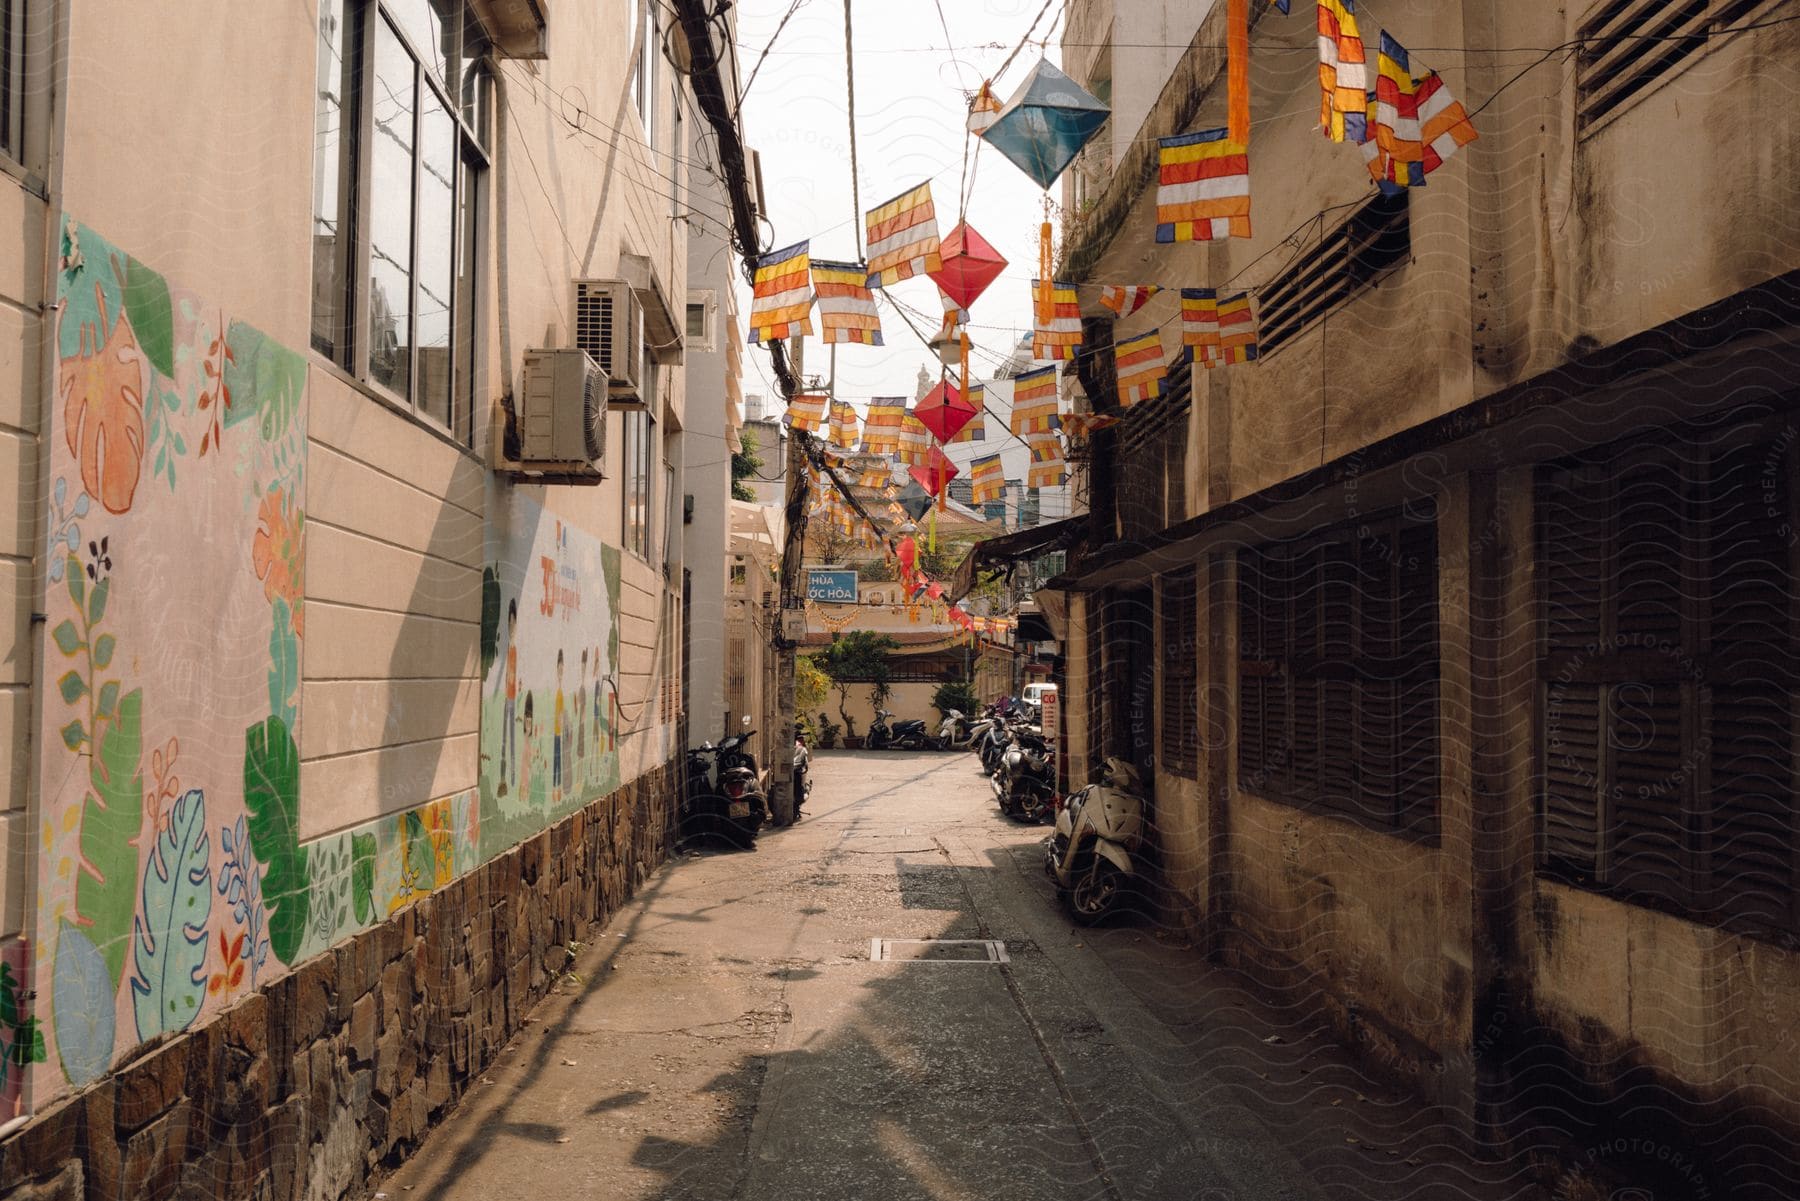 Motorbikes are parked in a neighborhood alley with colored flags strung overhead